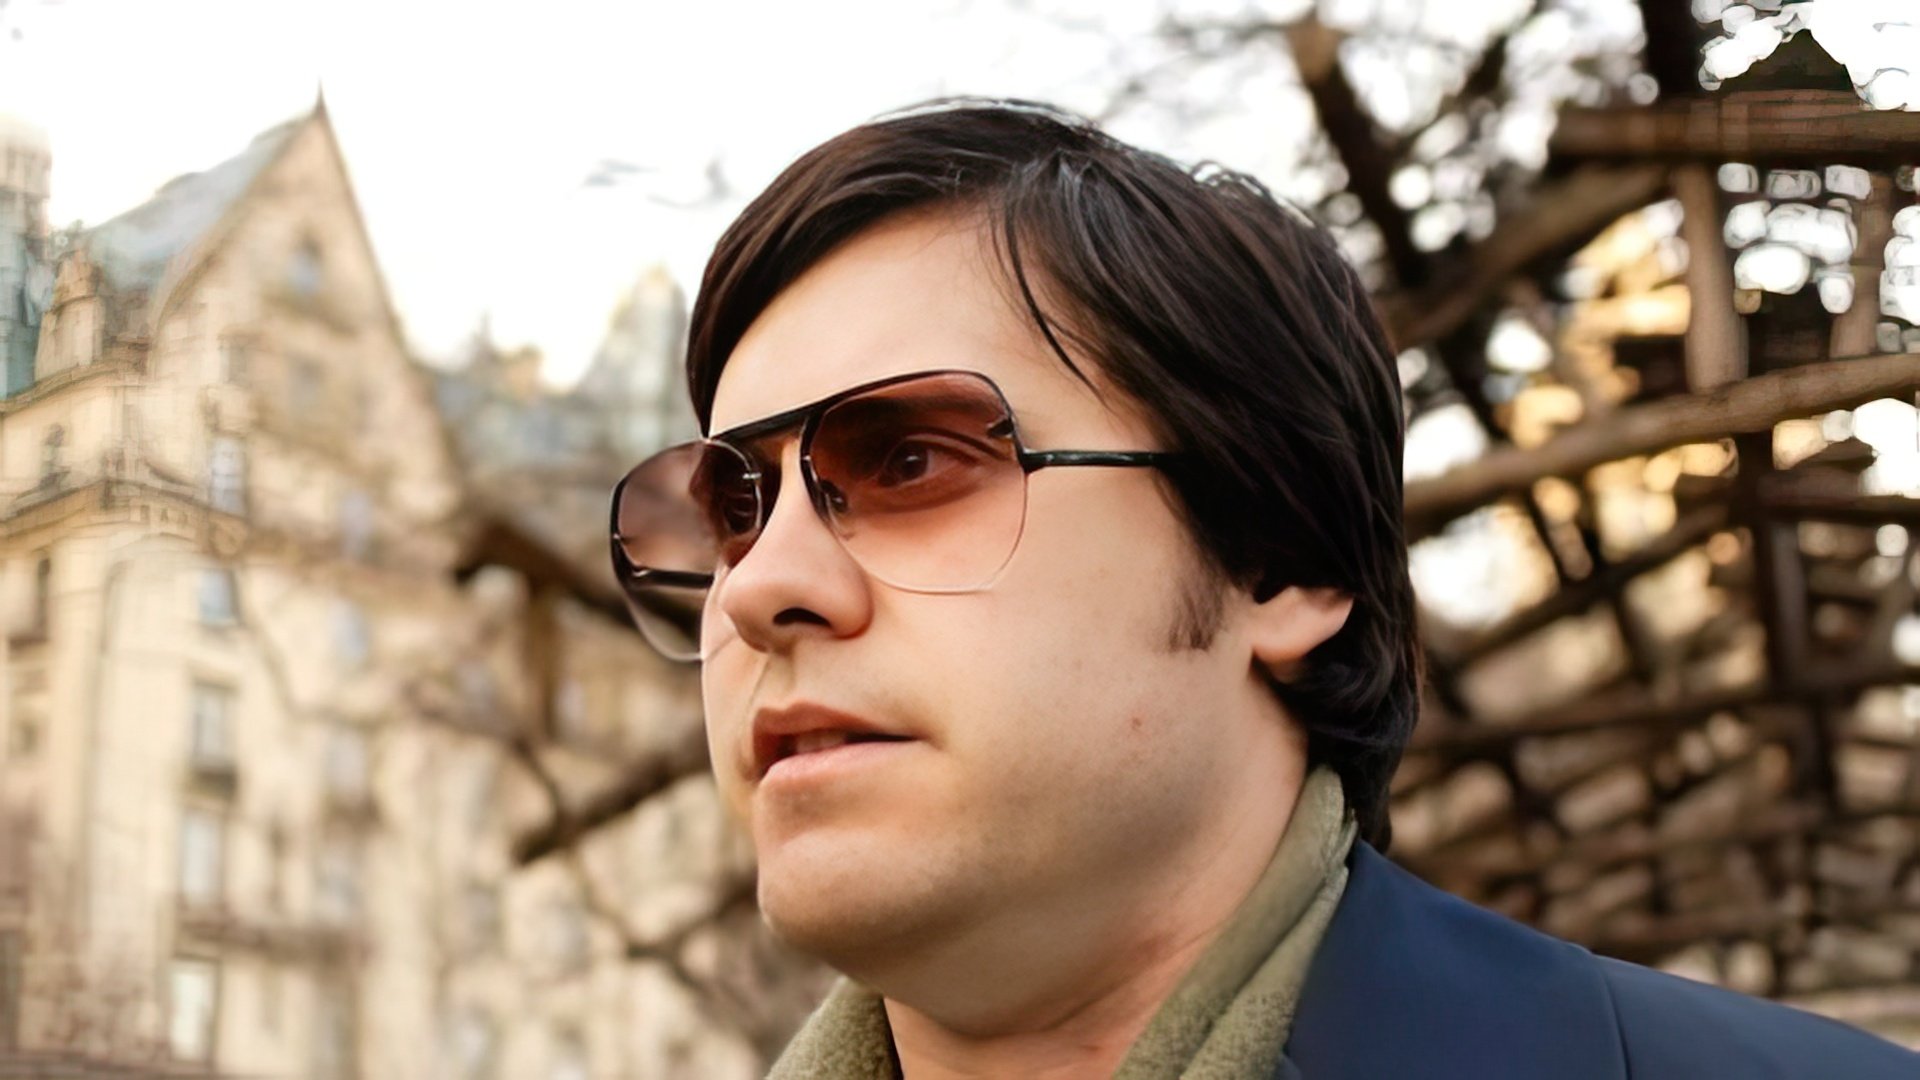 For the role of Mark Chapman, Jared Leto gained weight